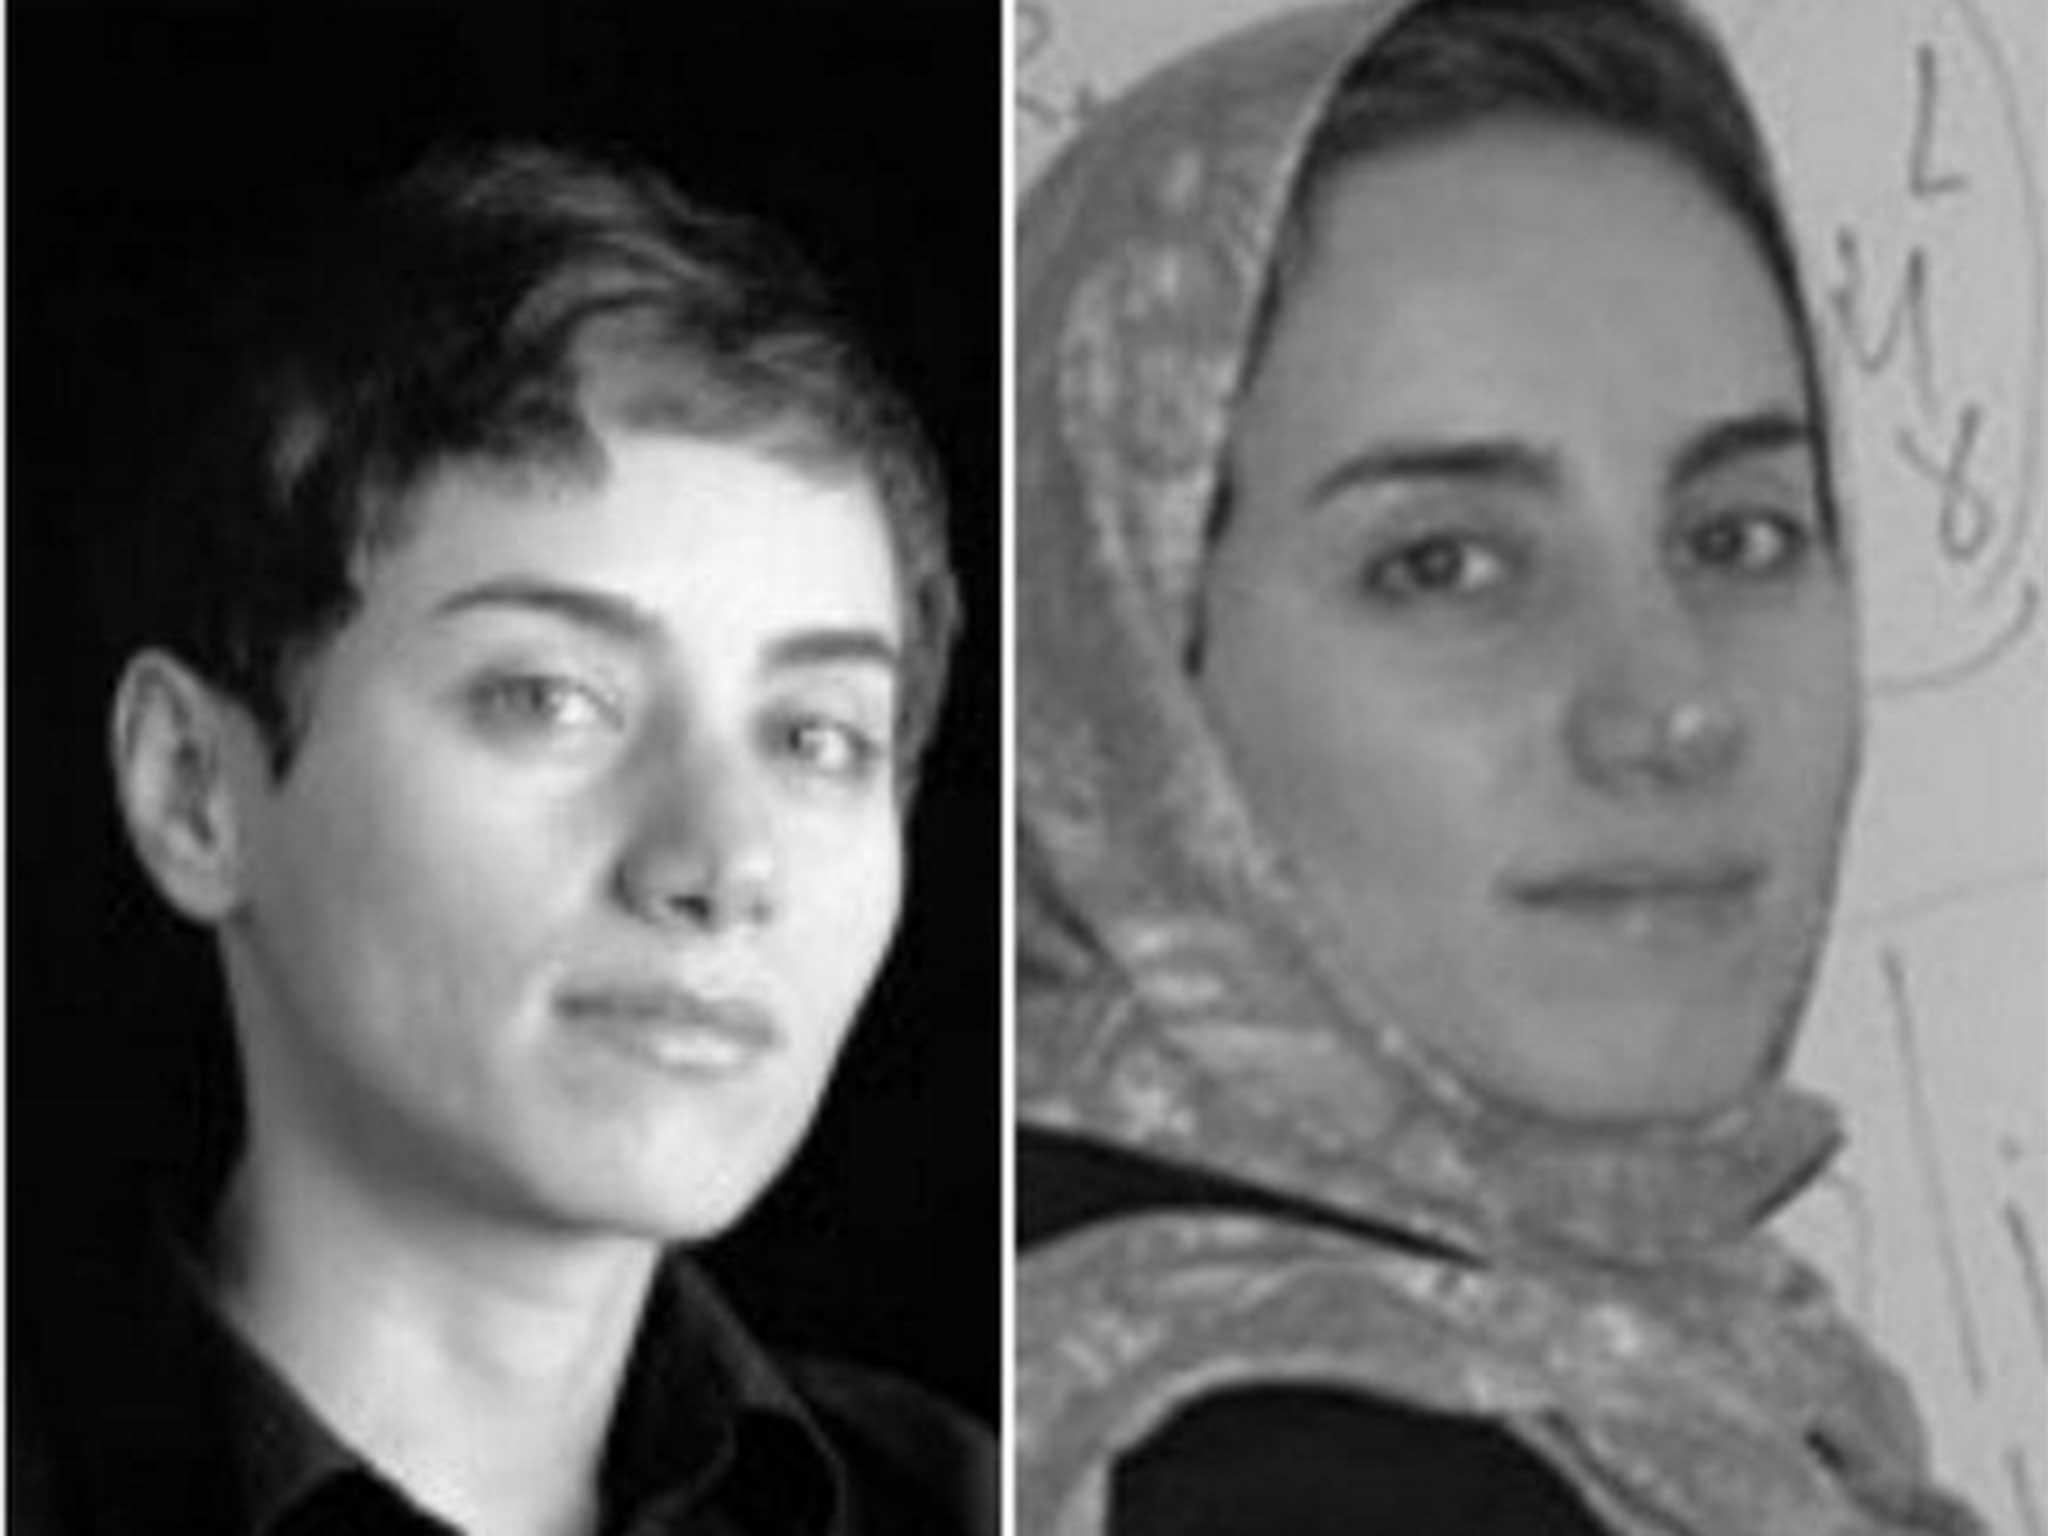 Twitter picture tweeted by Rouhani, showing Mirzakhani in a headscarf - and without